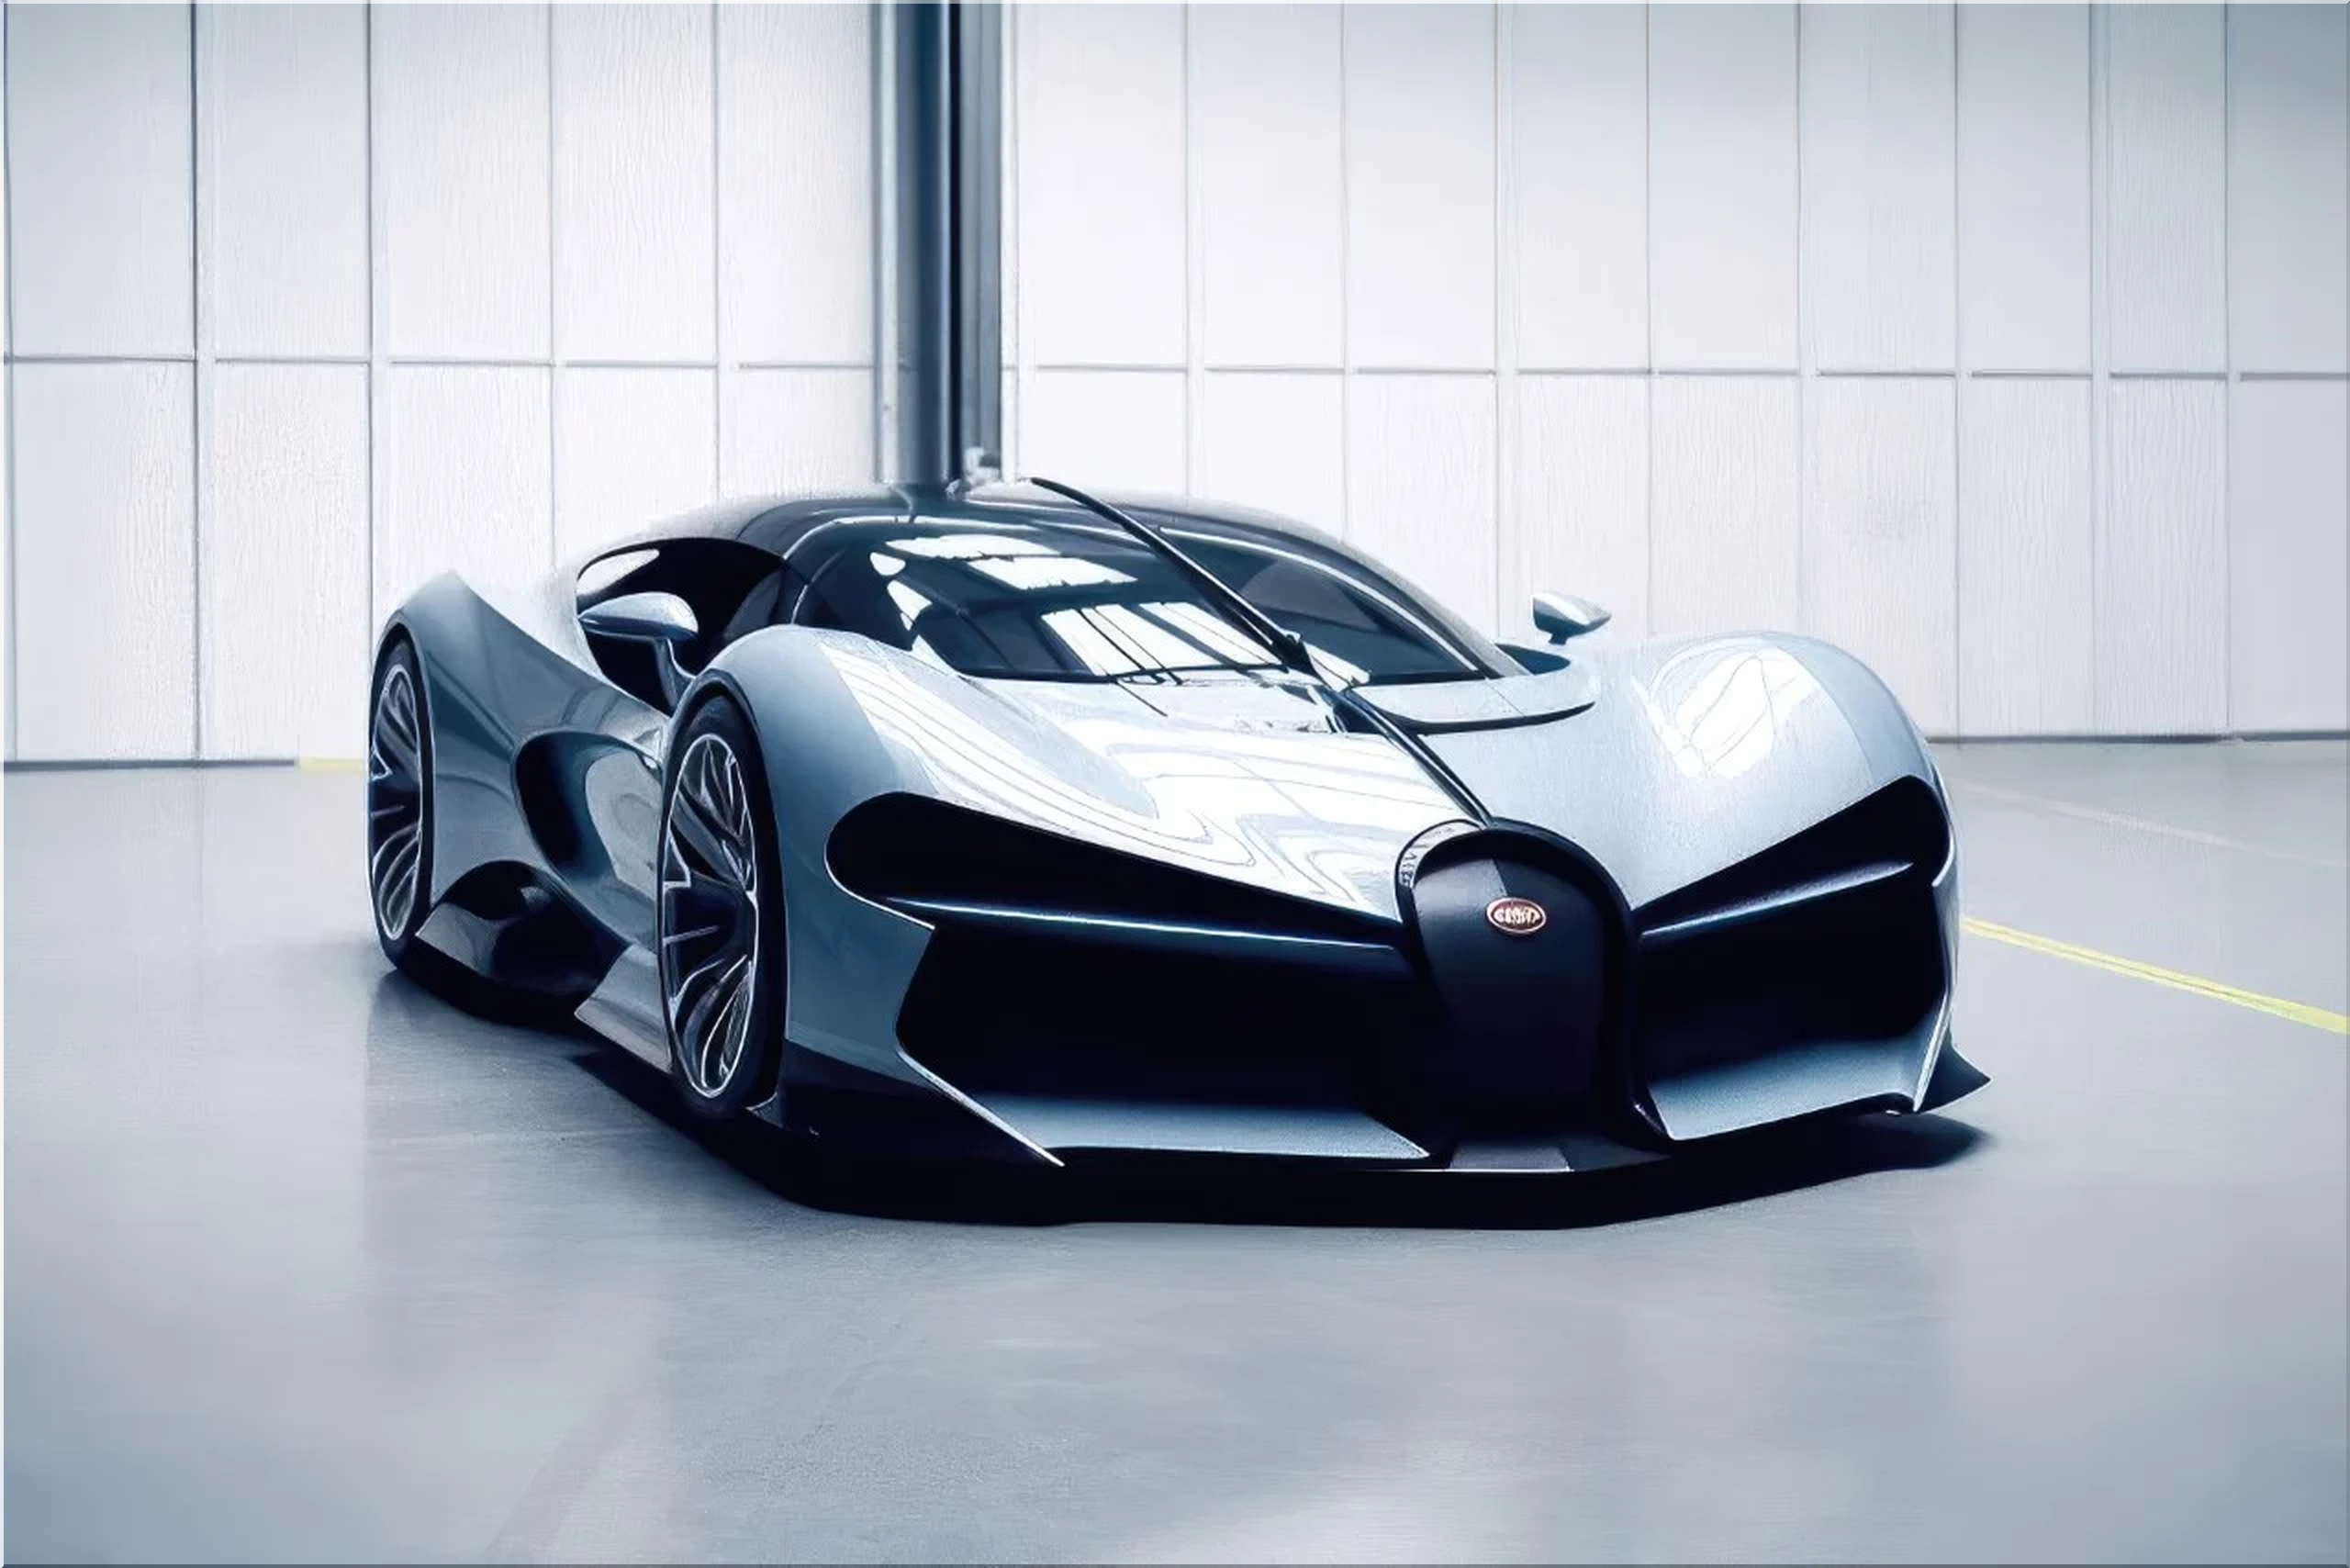 Bugatti is making Bolide hypercar concept a reality